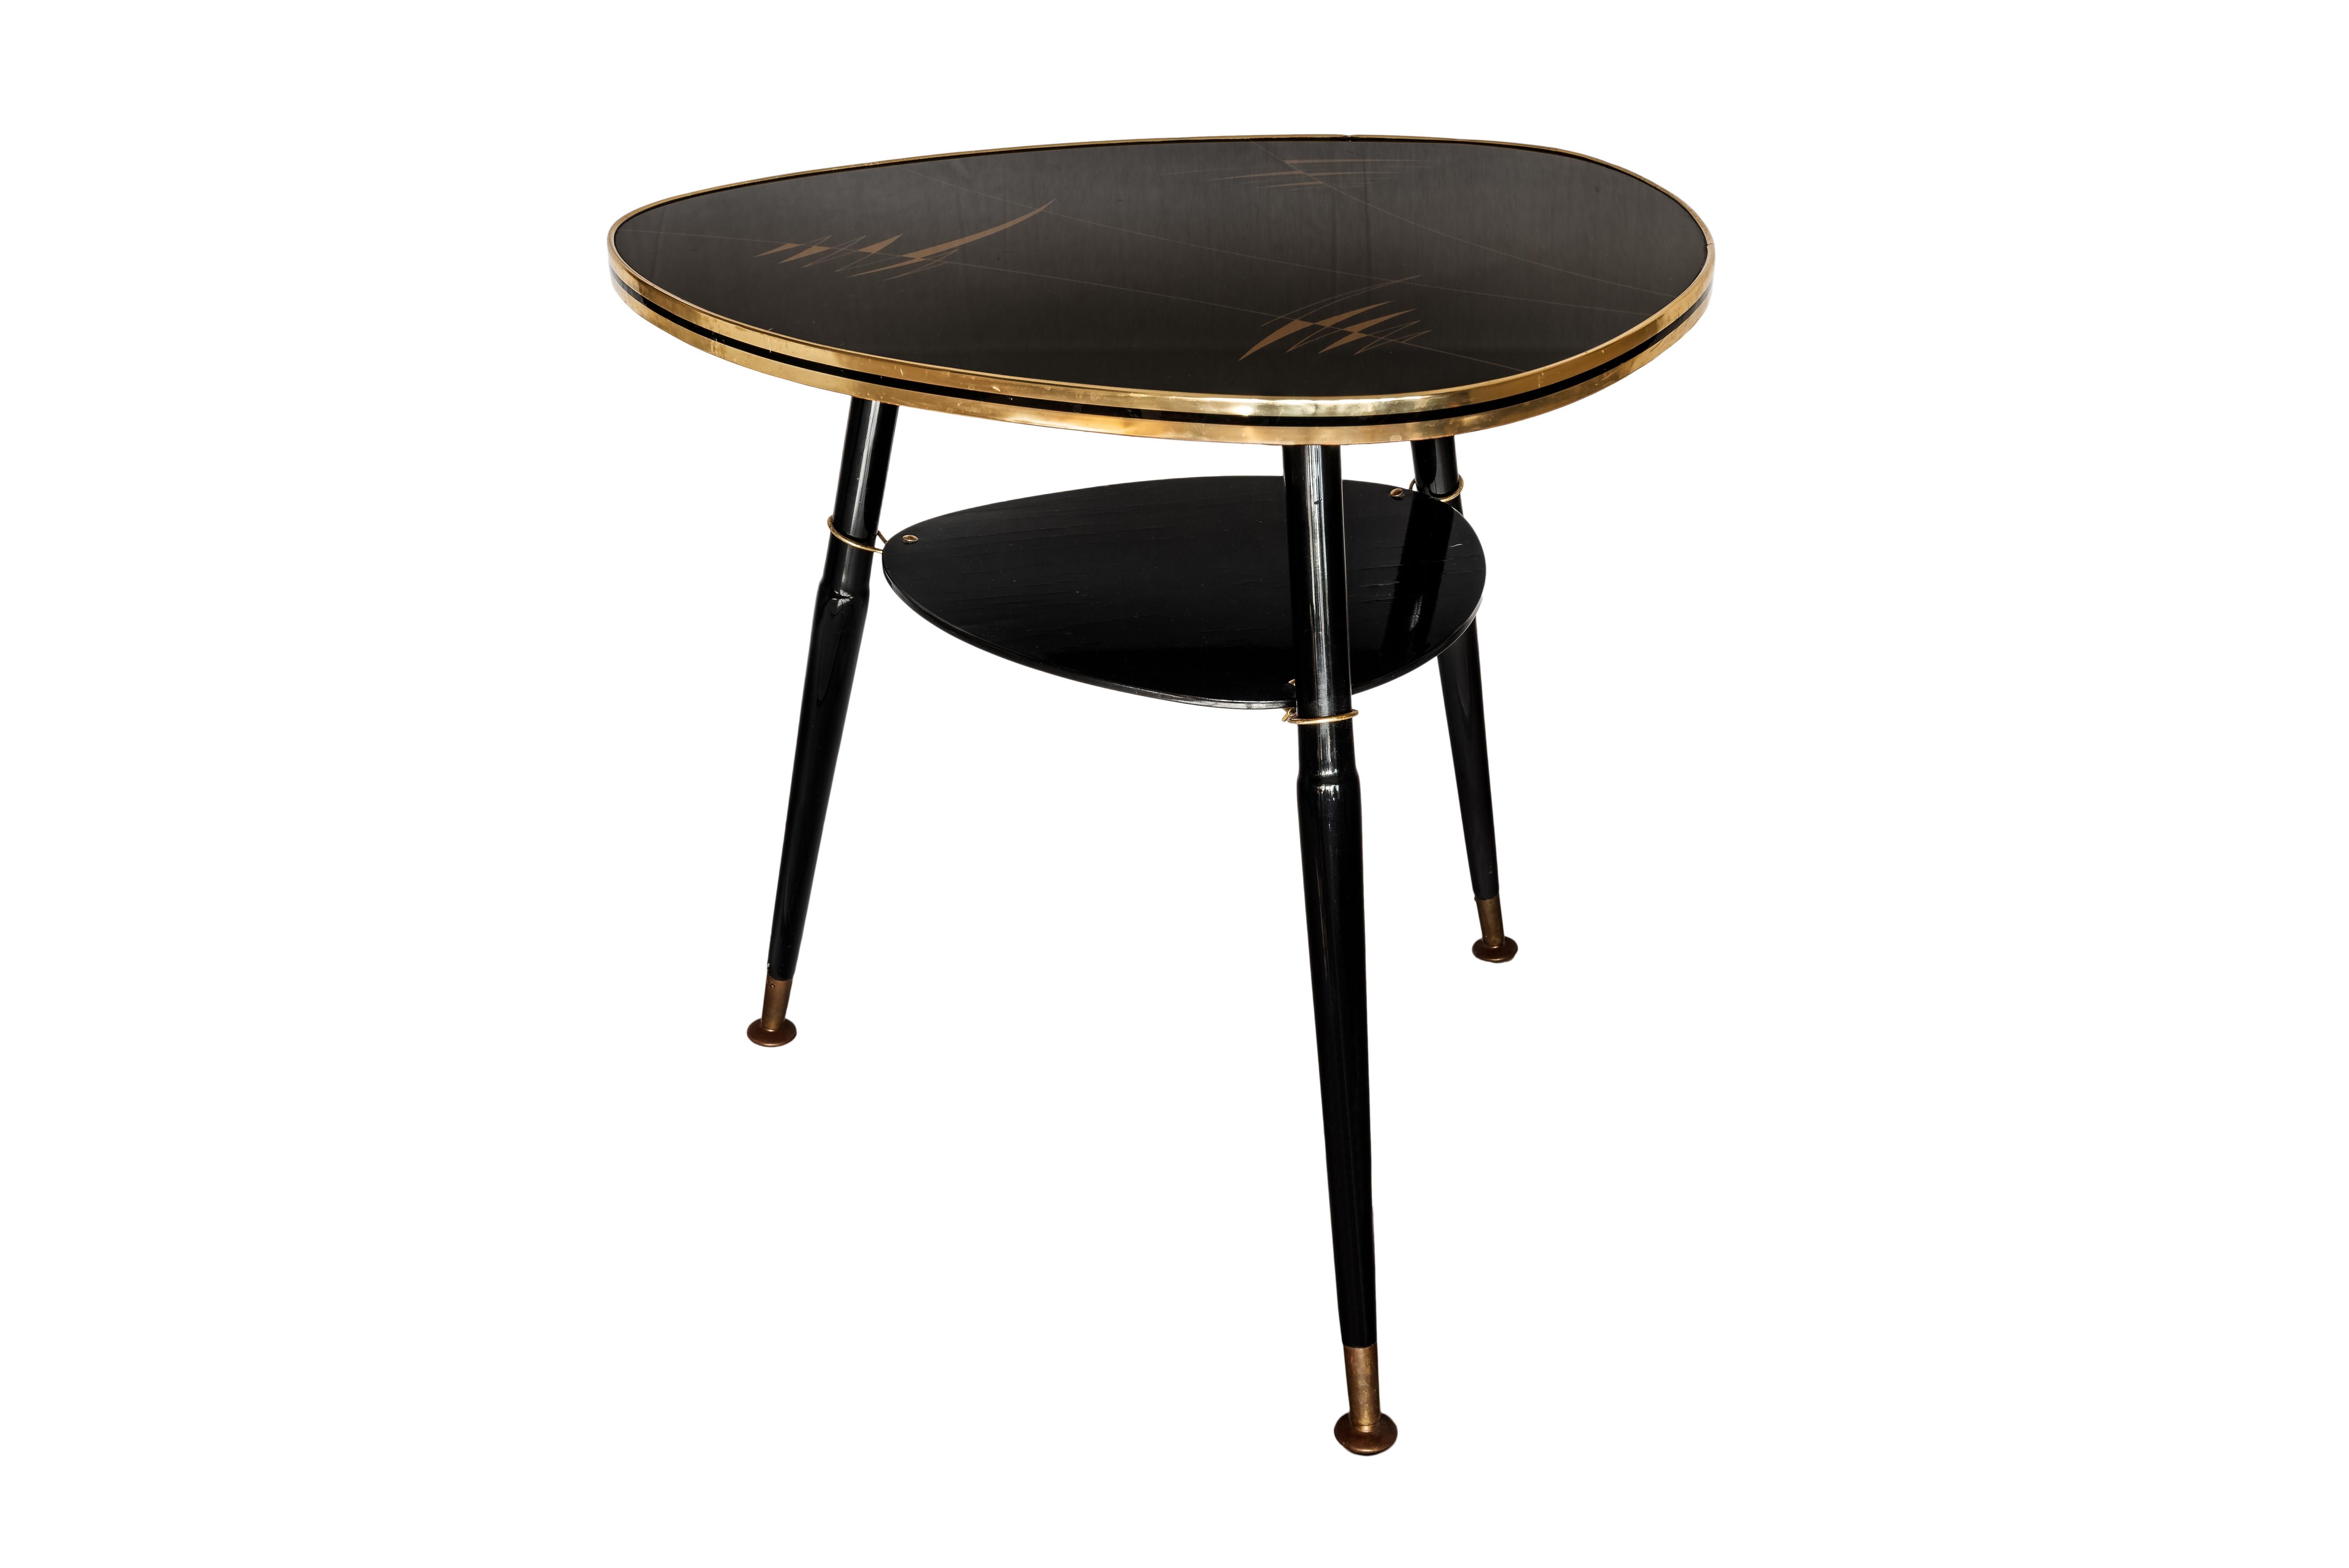 Midcentury black lacquered wood and Resopal glass plate, Ilse Möbel, Germany.
Midcentury coffee or side table from with a black glass Resopal tabletop with golden designs. Legs in wood and brass, with a lower plate under the main plate.
Produced